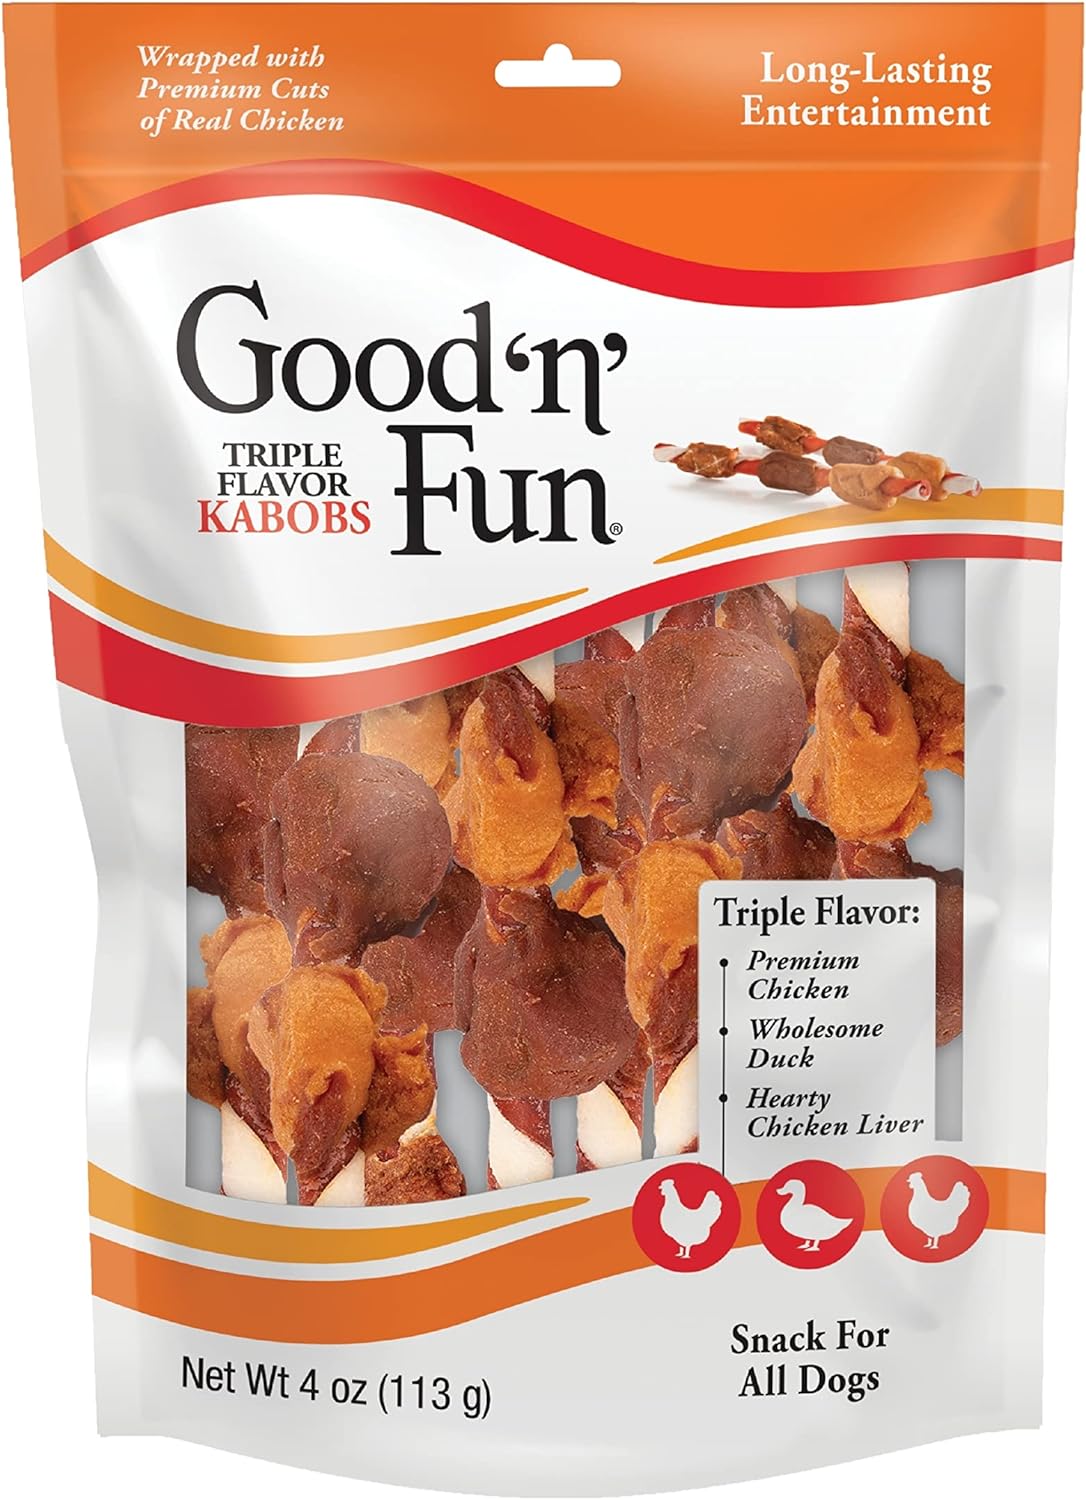 4-Oz Good'n'Fun Triple Flavor Kabob Snacks for Dogs (Chicken/Duck/Chicken Liver) $3.22 w/ S&S + Free Shipping w/ Prime or on $35+